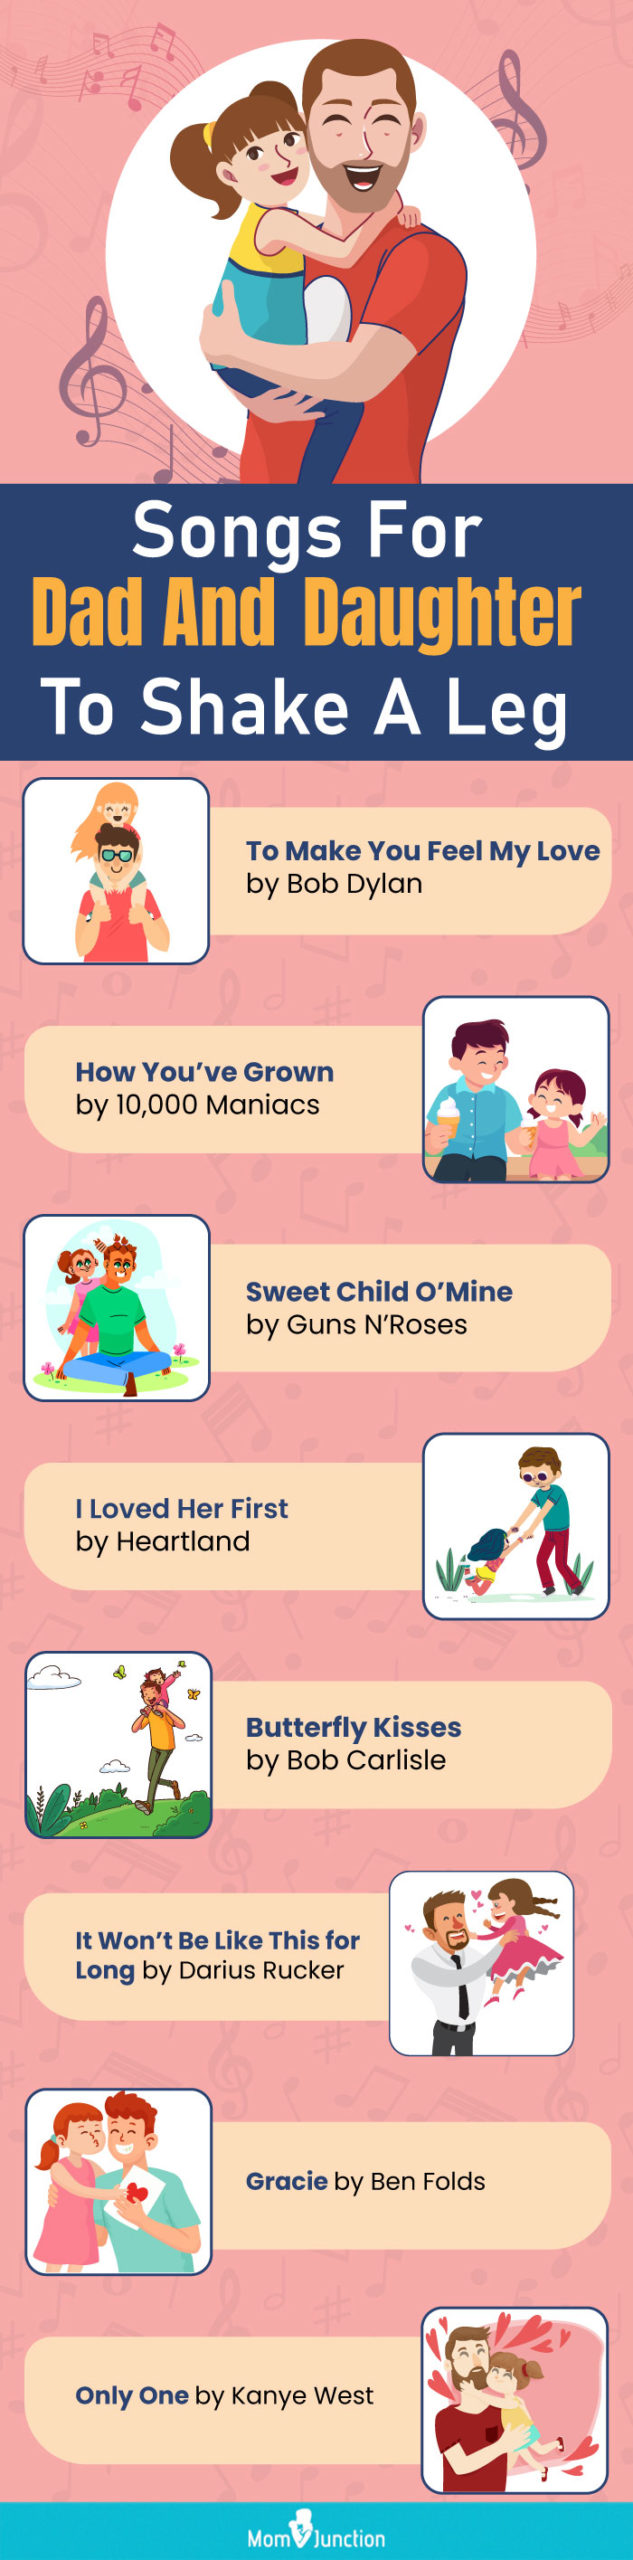 songs for dad and daughter to shake a leg (infographic)